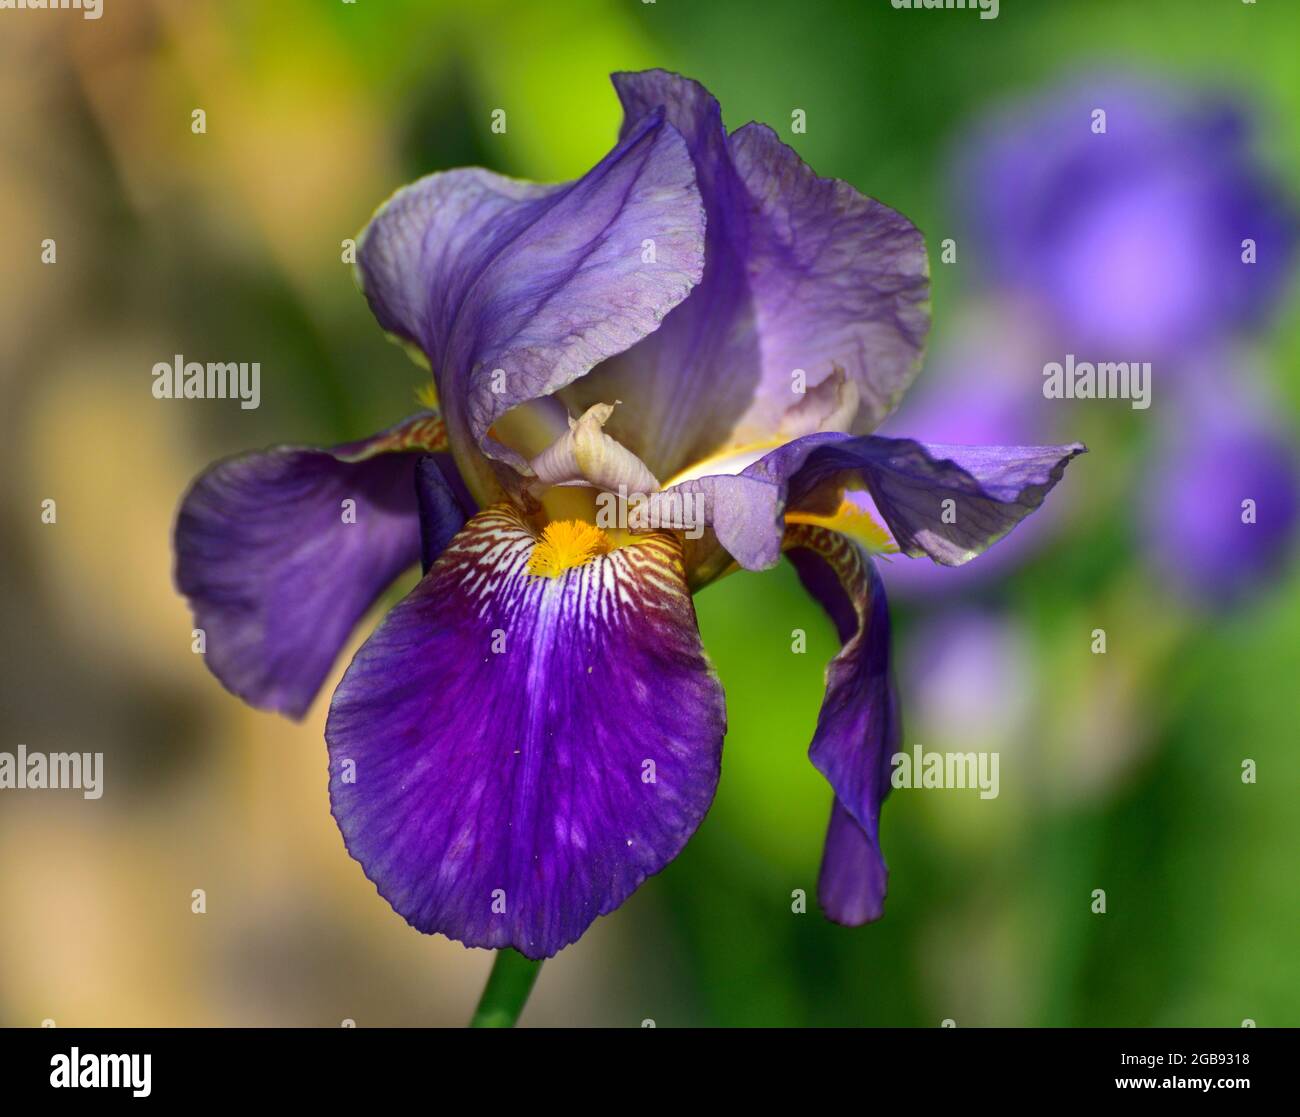 Blue-violet flower of an iris (Iris barbata cultivated form), Raubling, Bavaria, Germany Stock Photo